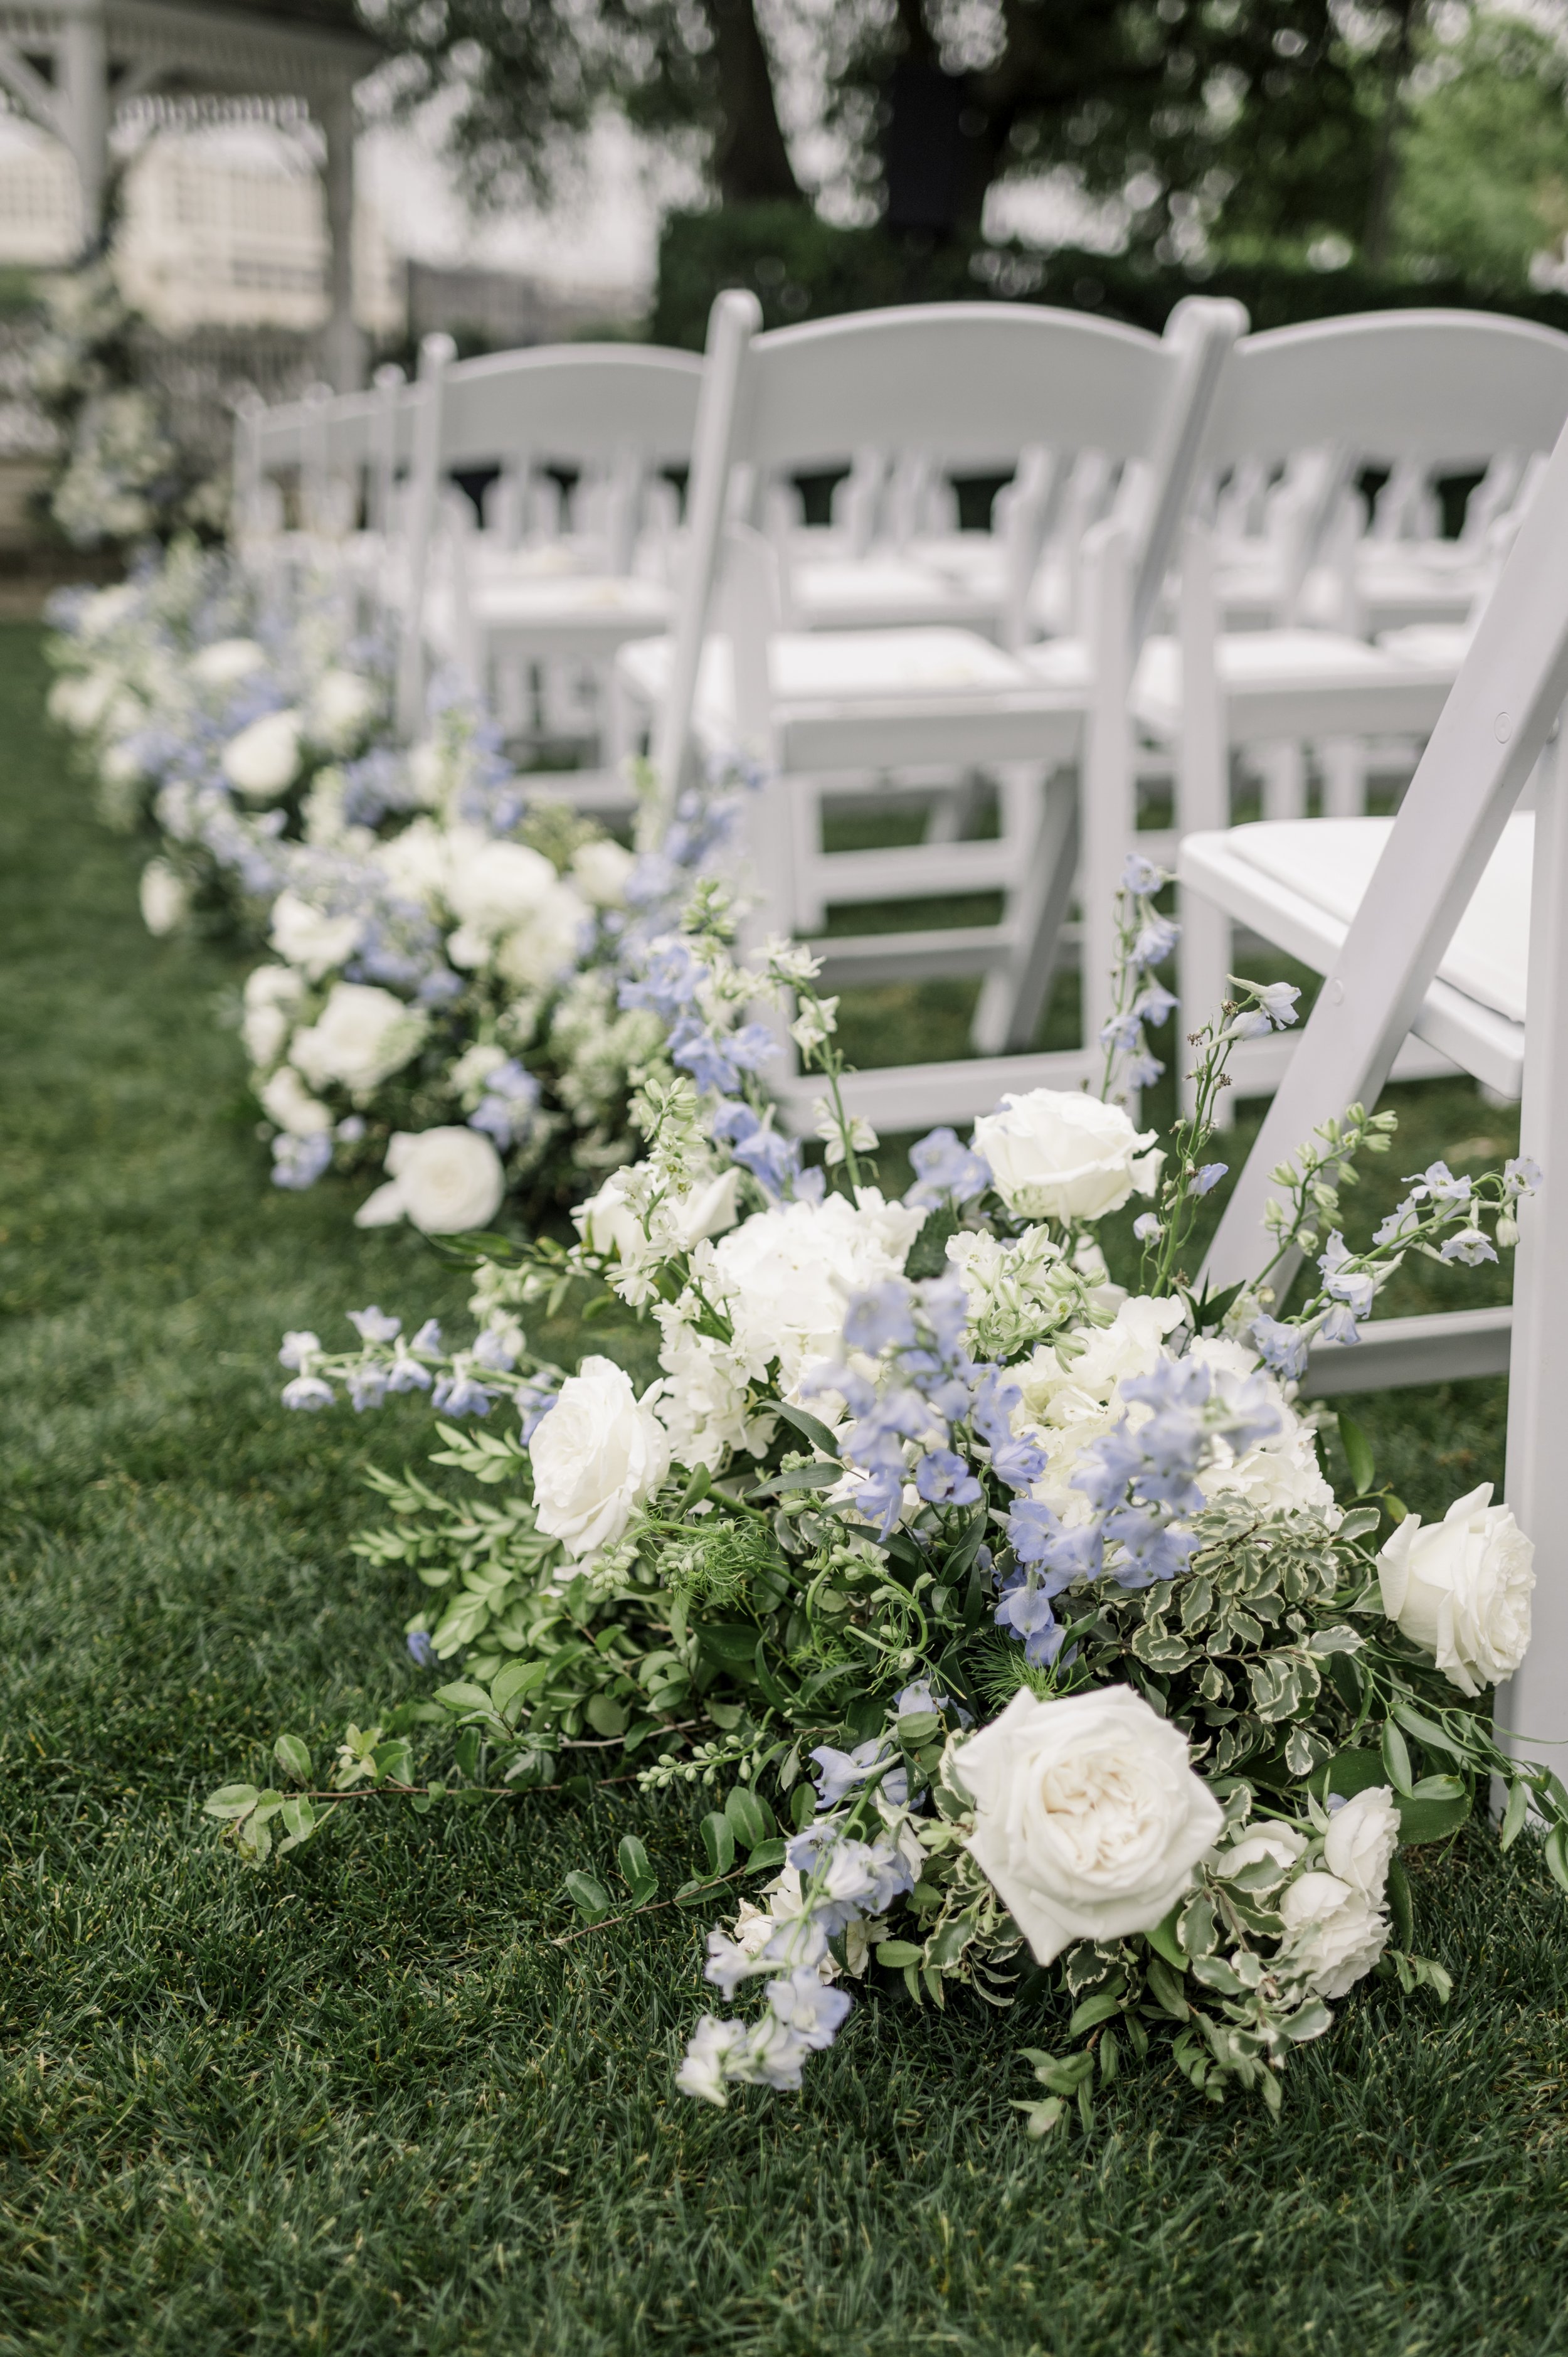 madison-and-rufus-chic-southern-wedding-at-the-westin-savannah-harbor-with-a-summery-white-and-blue-color-palette-planned-by-savannah-wedding-planner-and-florist-ivory-and-beau-14.jpg